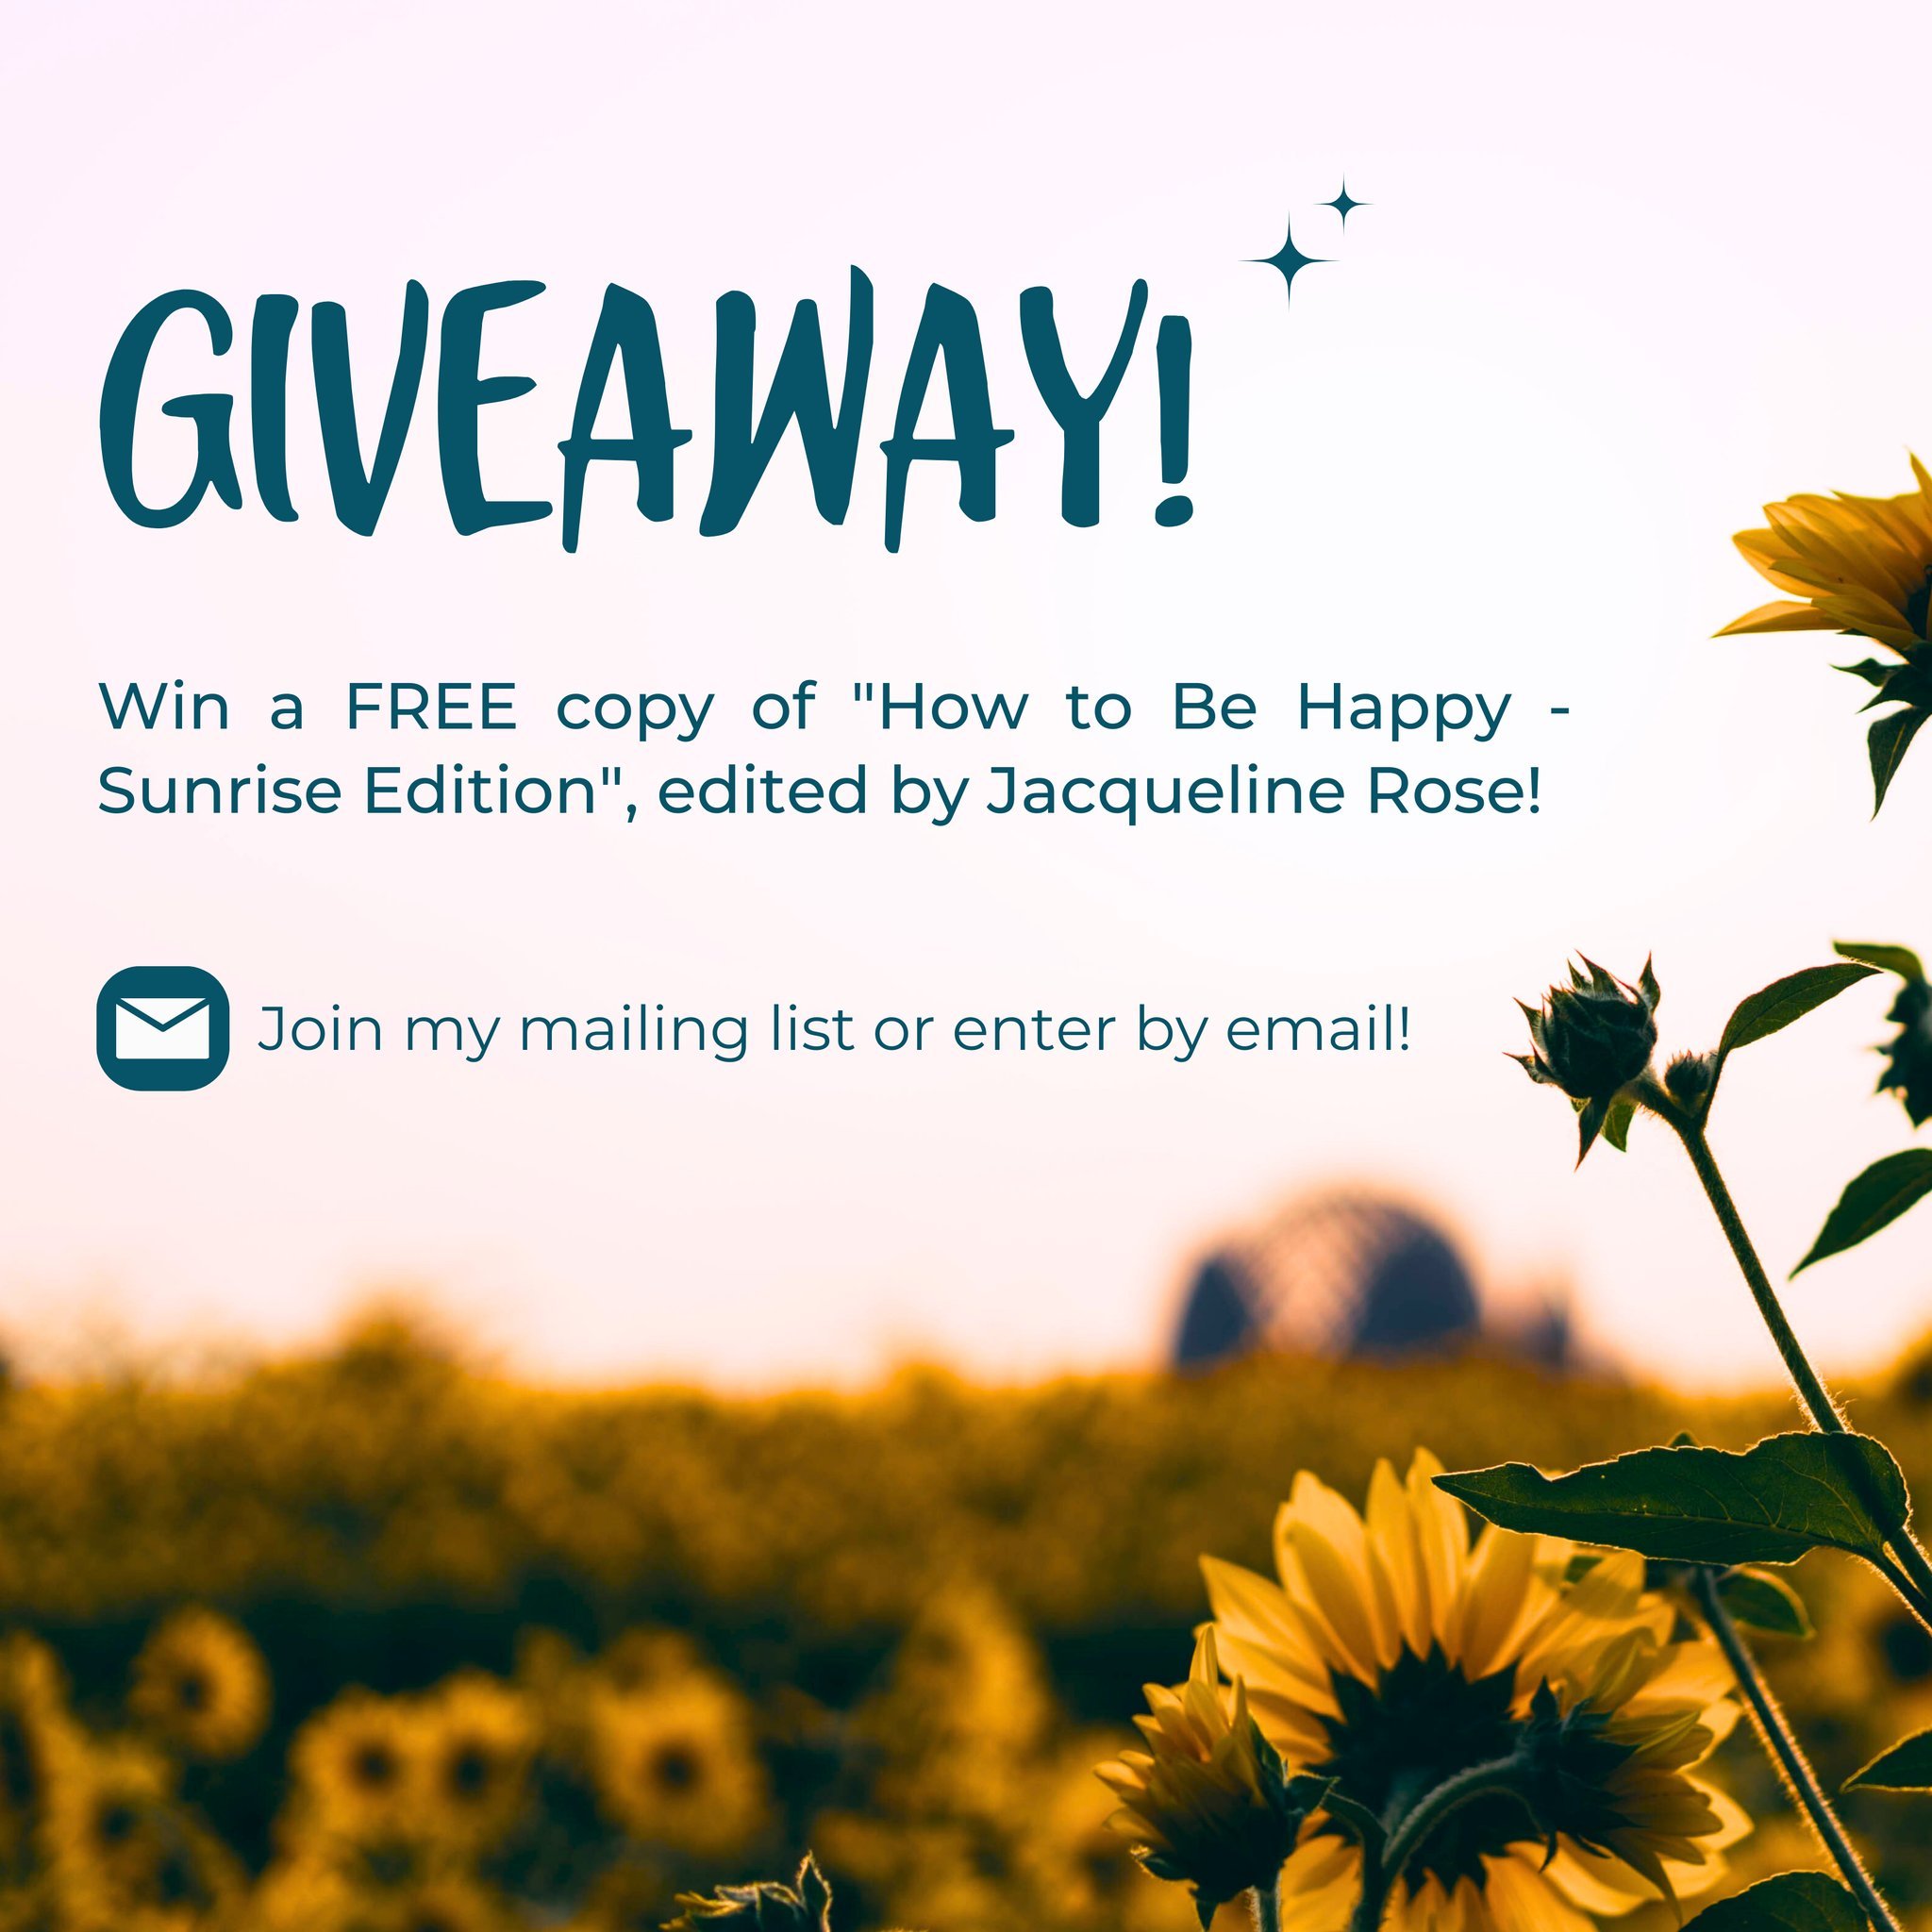 It&rsquo;s competition time! 🎁

Are you looking to explore happiness in a new light? ☀️

&quot;How to Be Happy - Sunrise Edition&quot;, edited by Jacqueline Rose, is a wonderful book that dives into the topic of happiness and features a chapter I ha